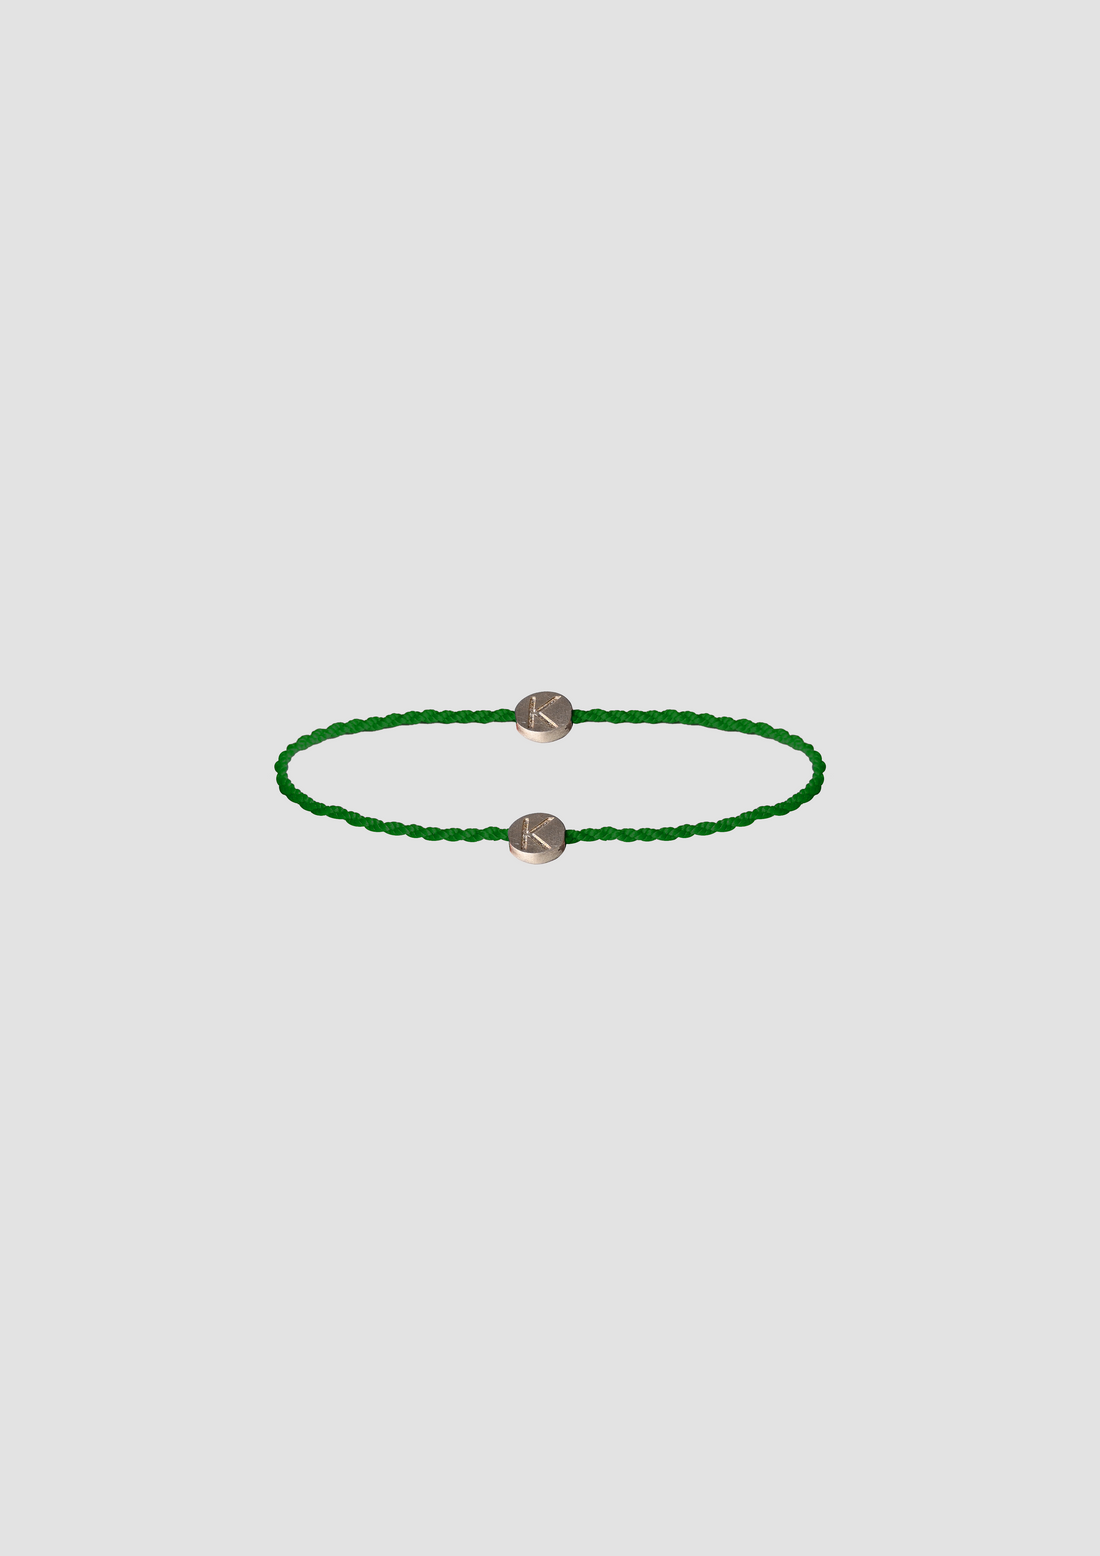 Moon Bracelet in Silver and Cord in Green